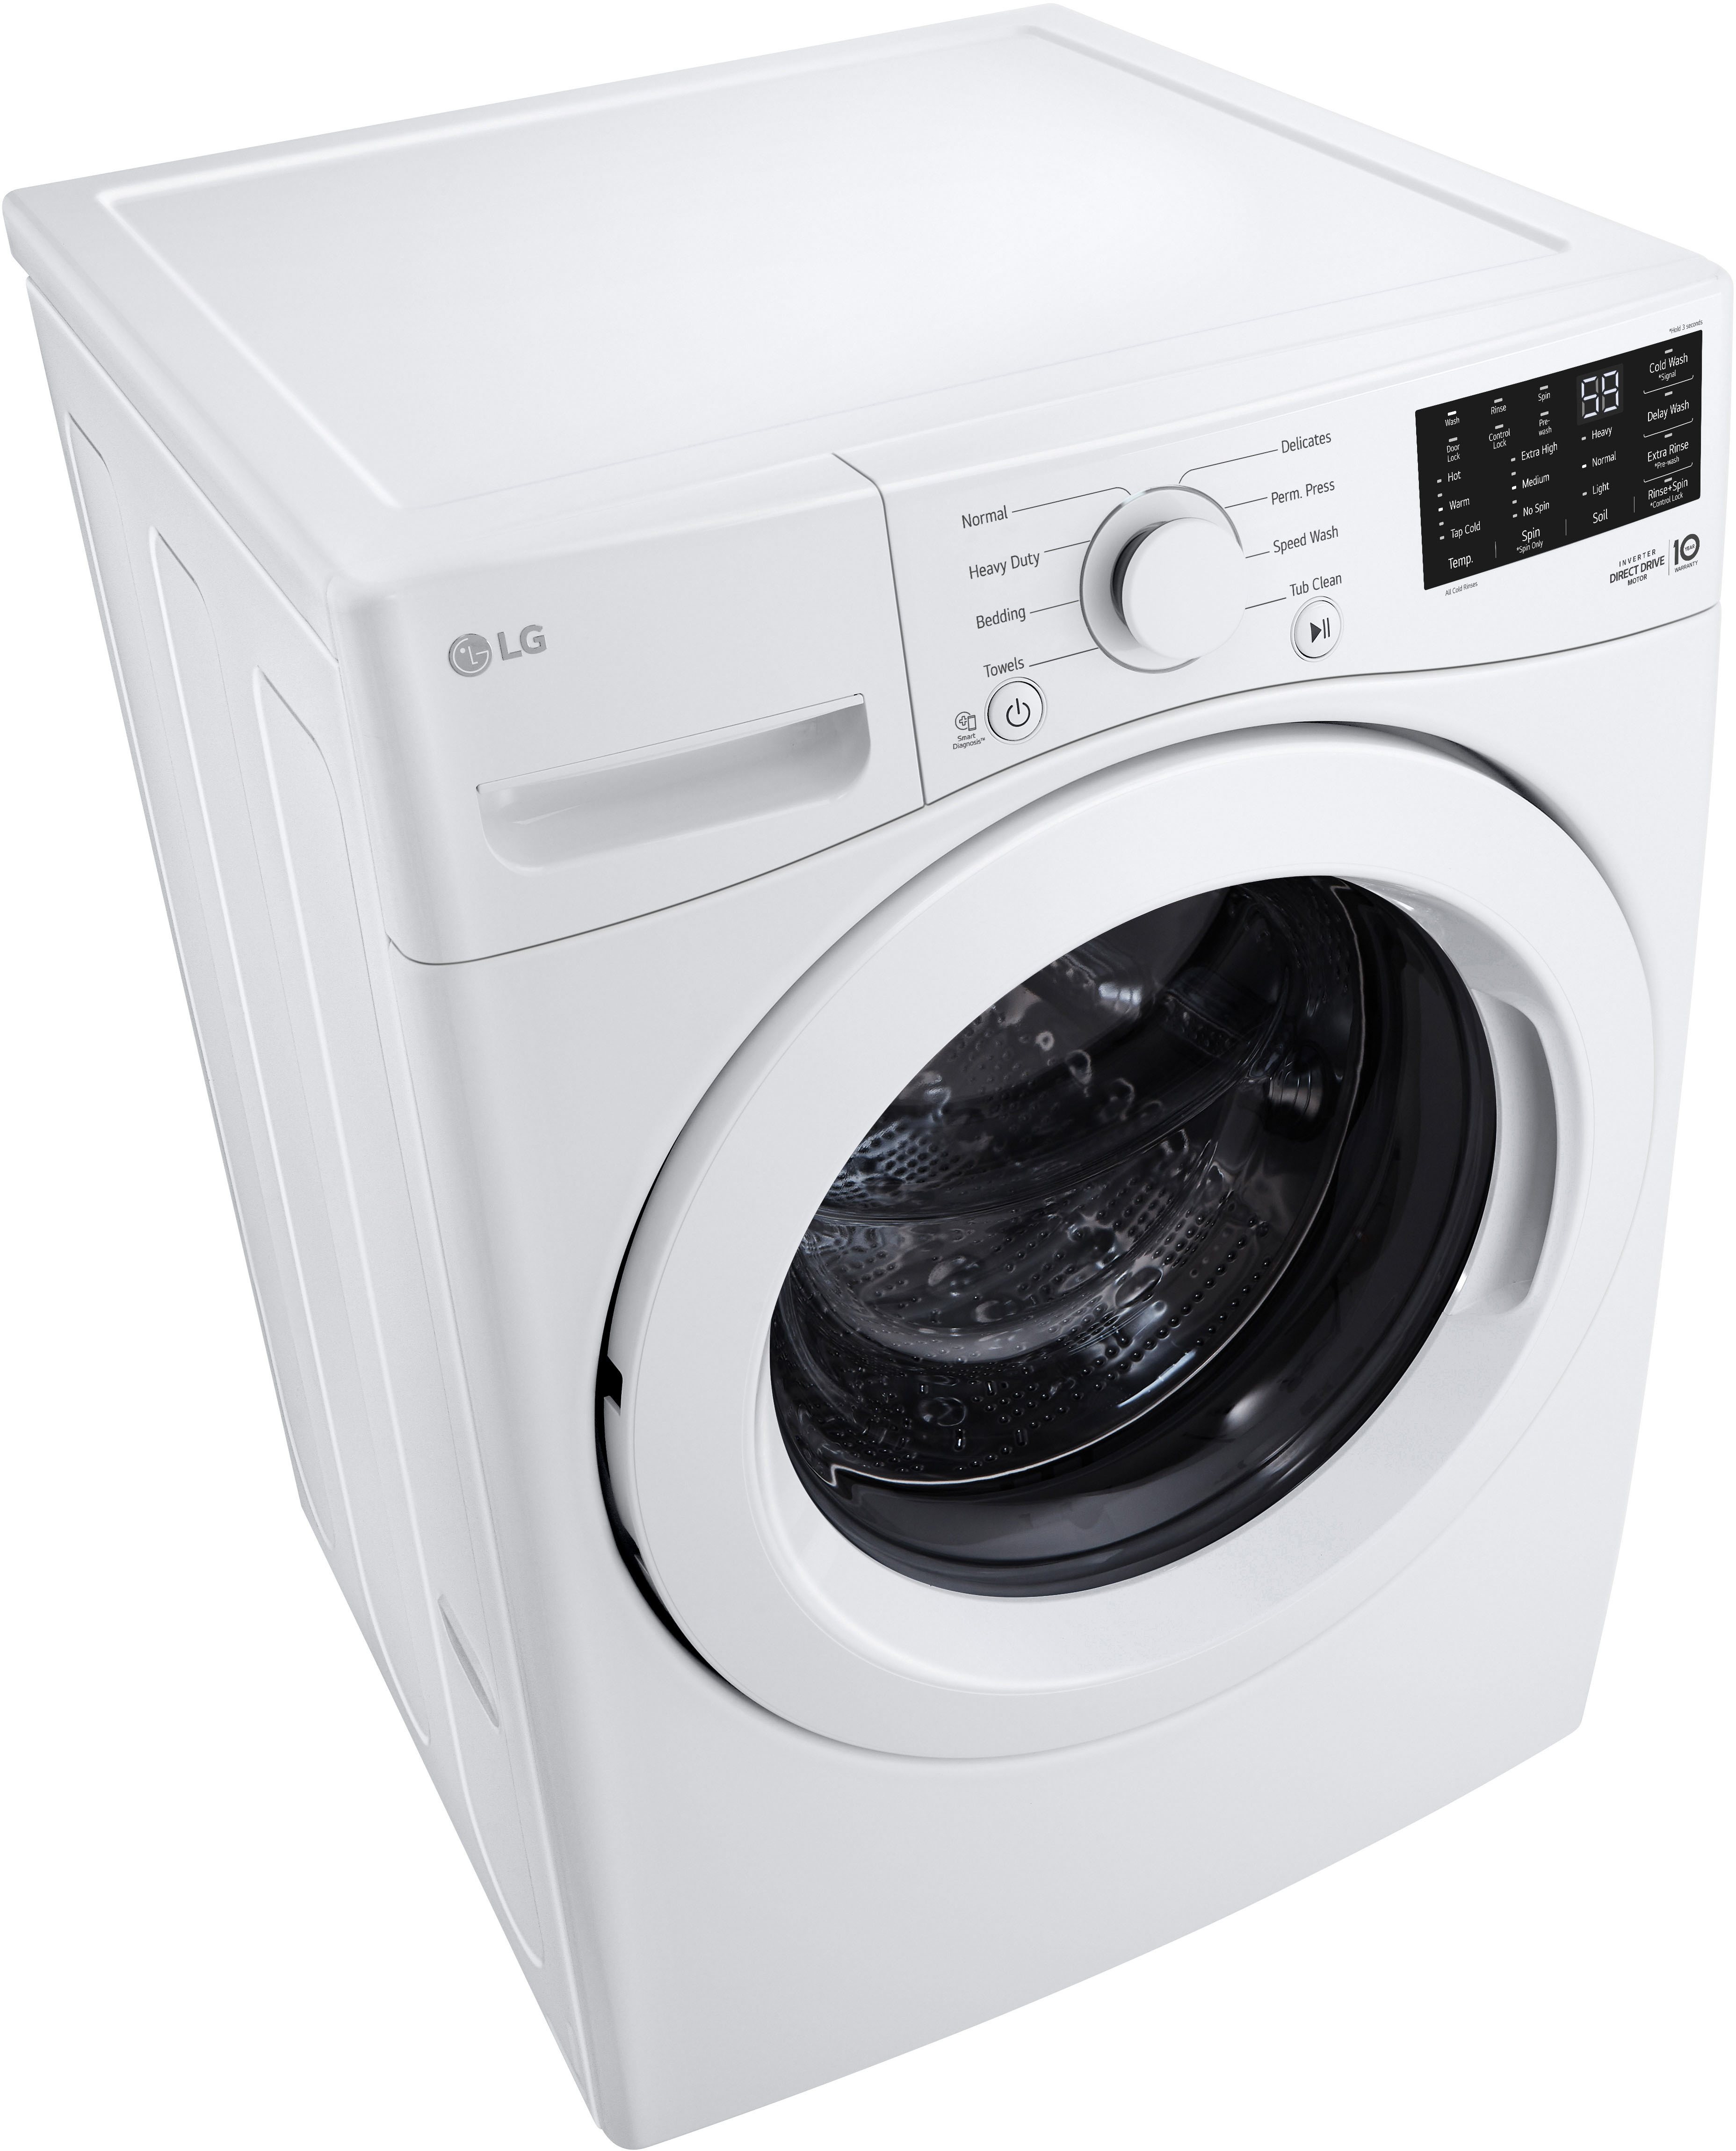 LG 5.0 Cu. Ft. High-Efficiency with White Buy Washer Best 6Motion Front Technology - WM3470CW Load